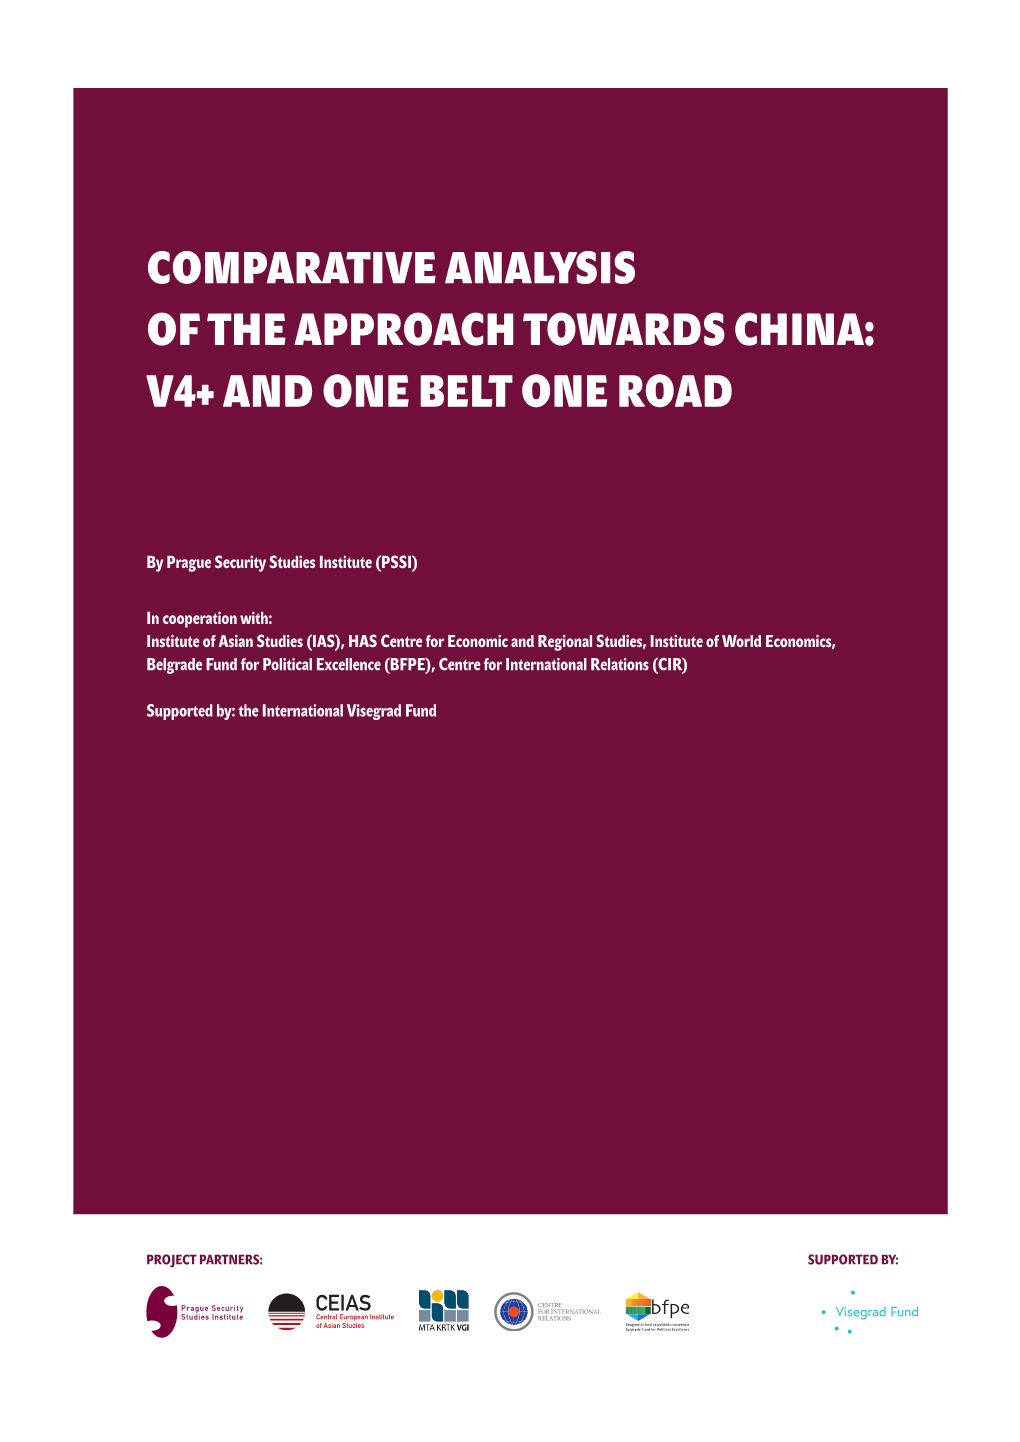 Comparative Analysis of the Approach Towards China: V4+ and One Belt One Road